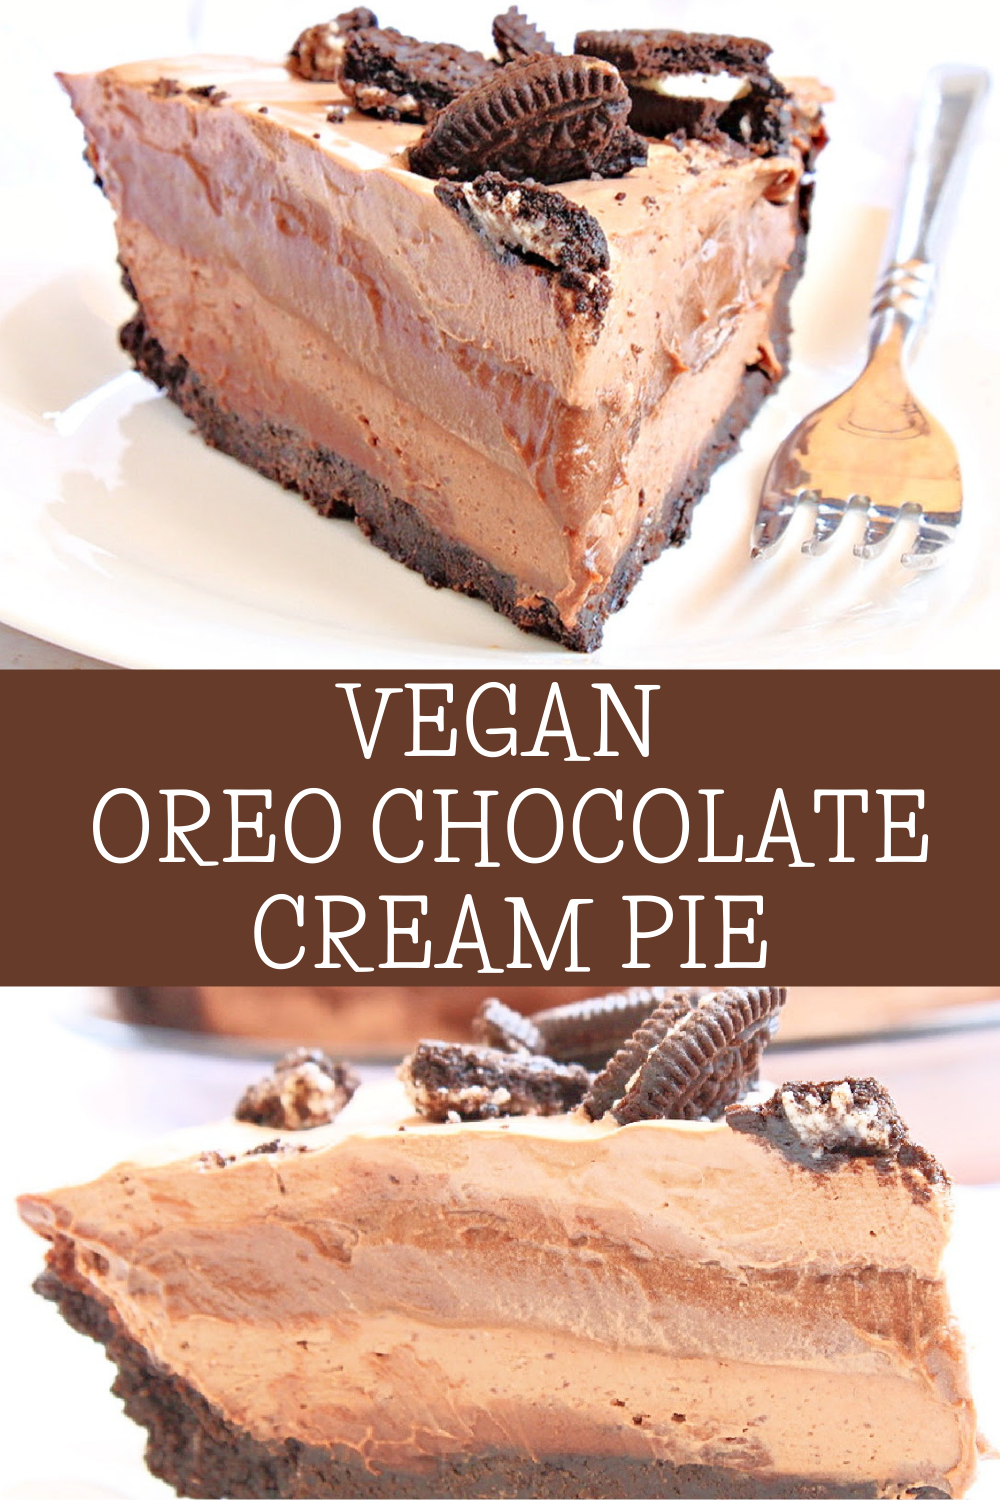 Oreo Chocolate Cream Pie ~ This no-bake pie is so rich and decadent, your guests won't even know or care that it's dairy-free! No nuts or tofu! via @thiswifecooks